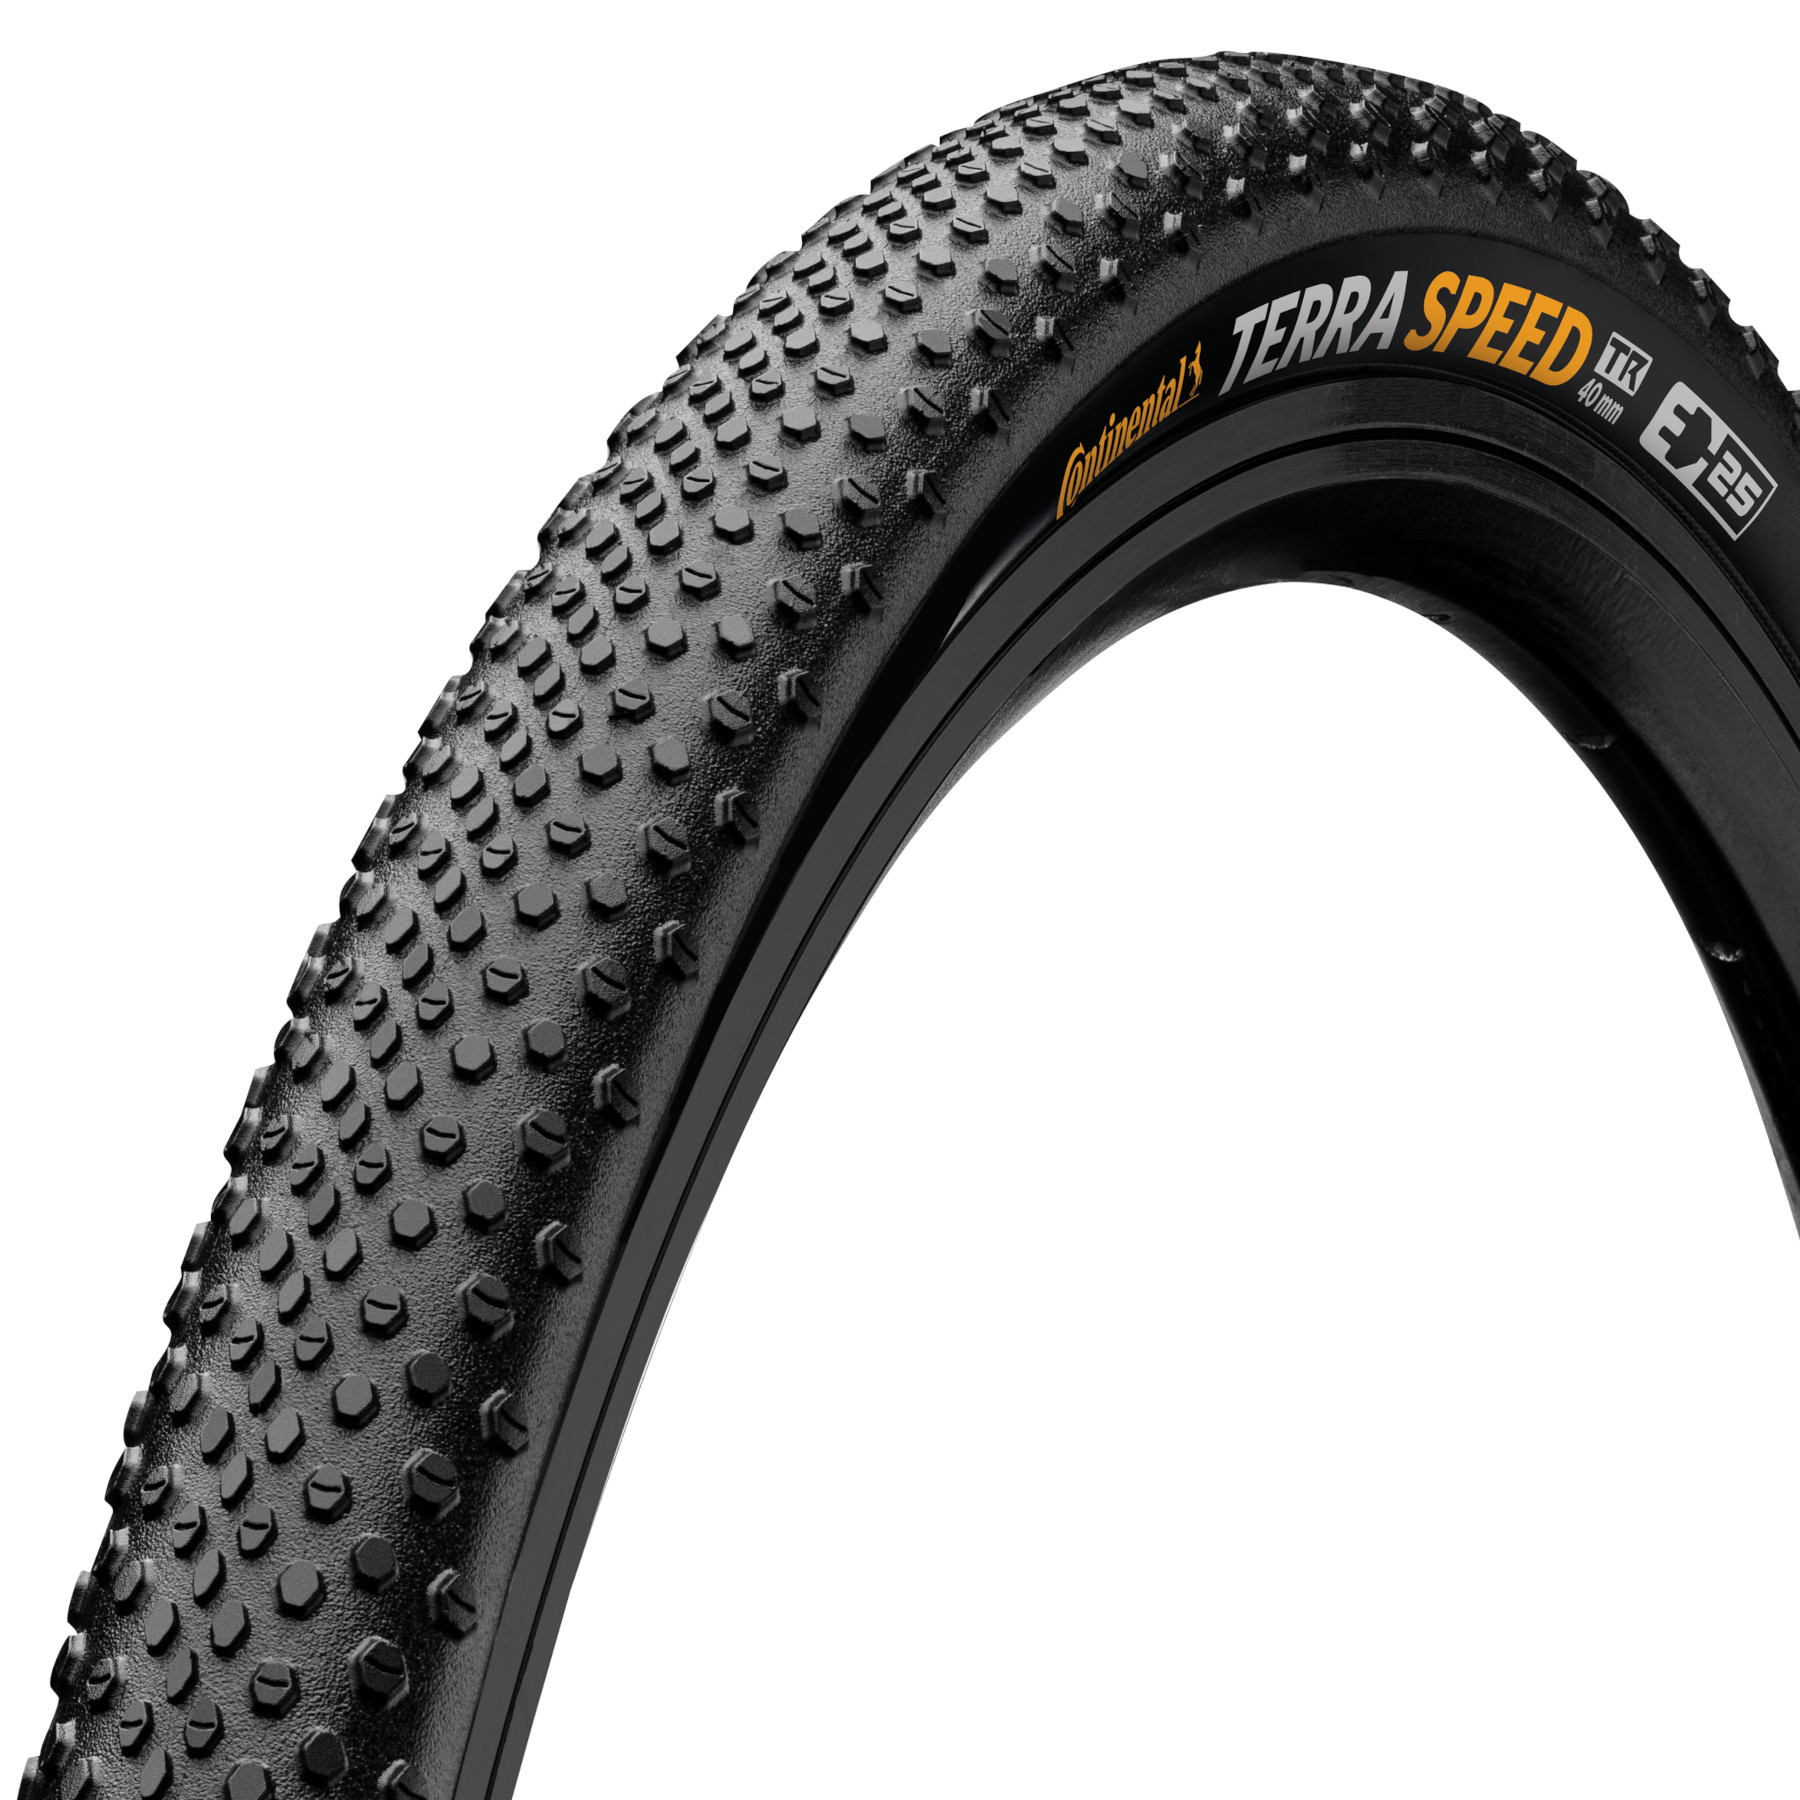 Image of Continental Terra Speed Folding Tire - Gravel | ProTection - 35-622 | black